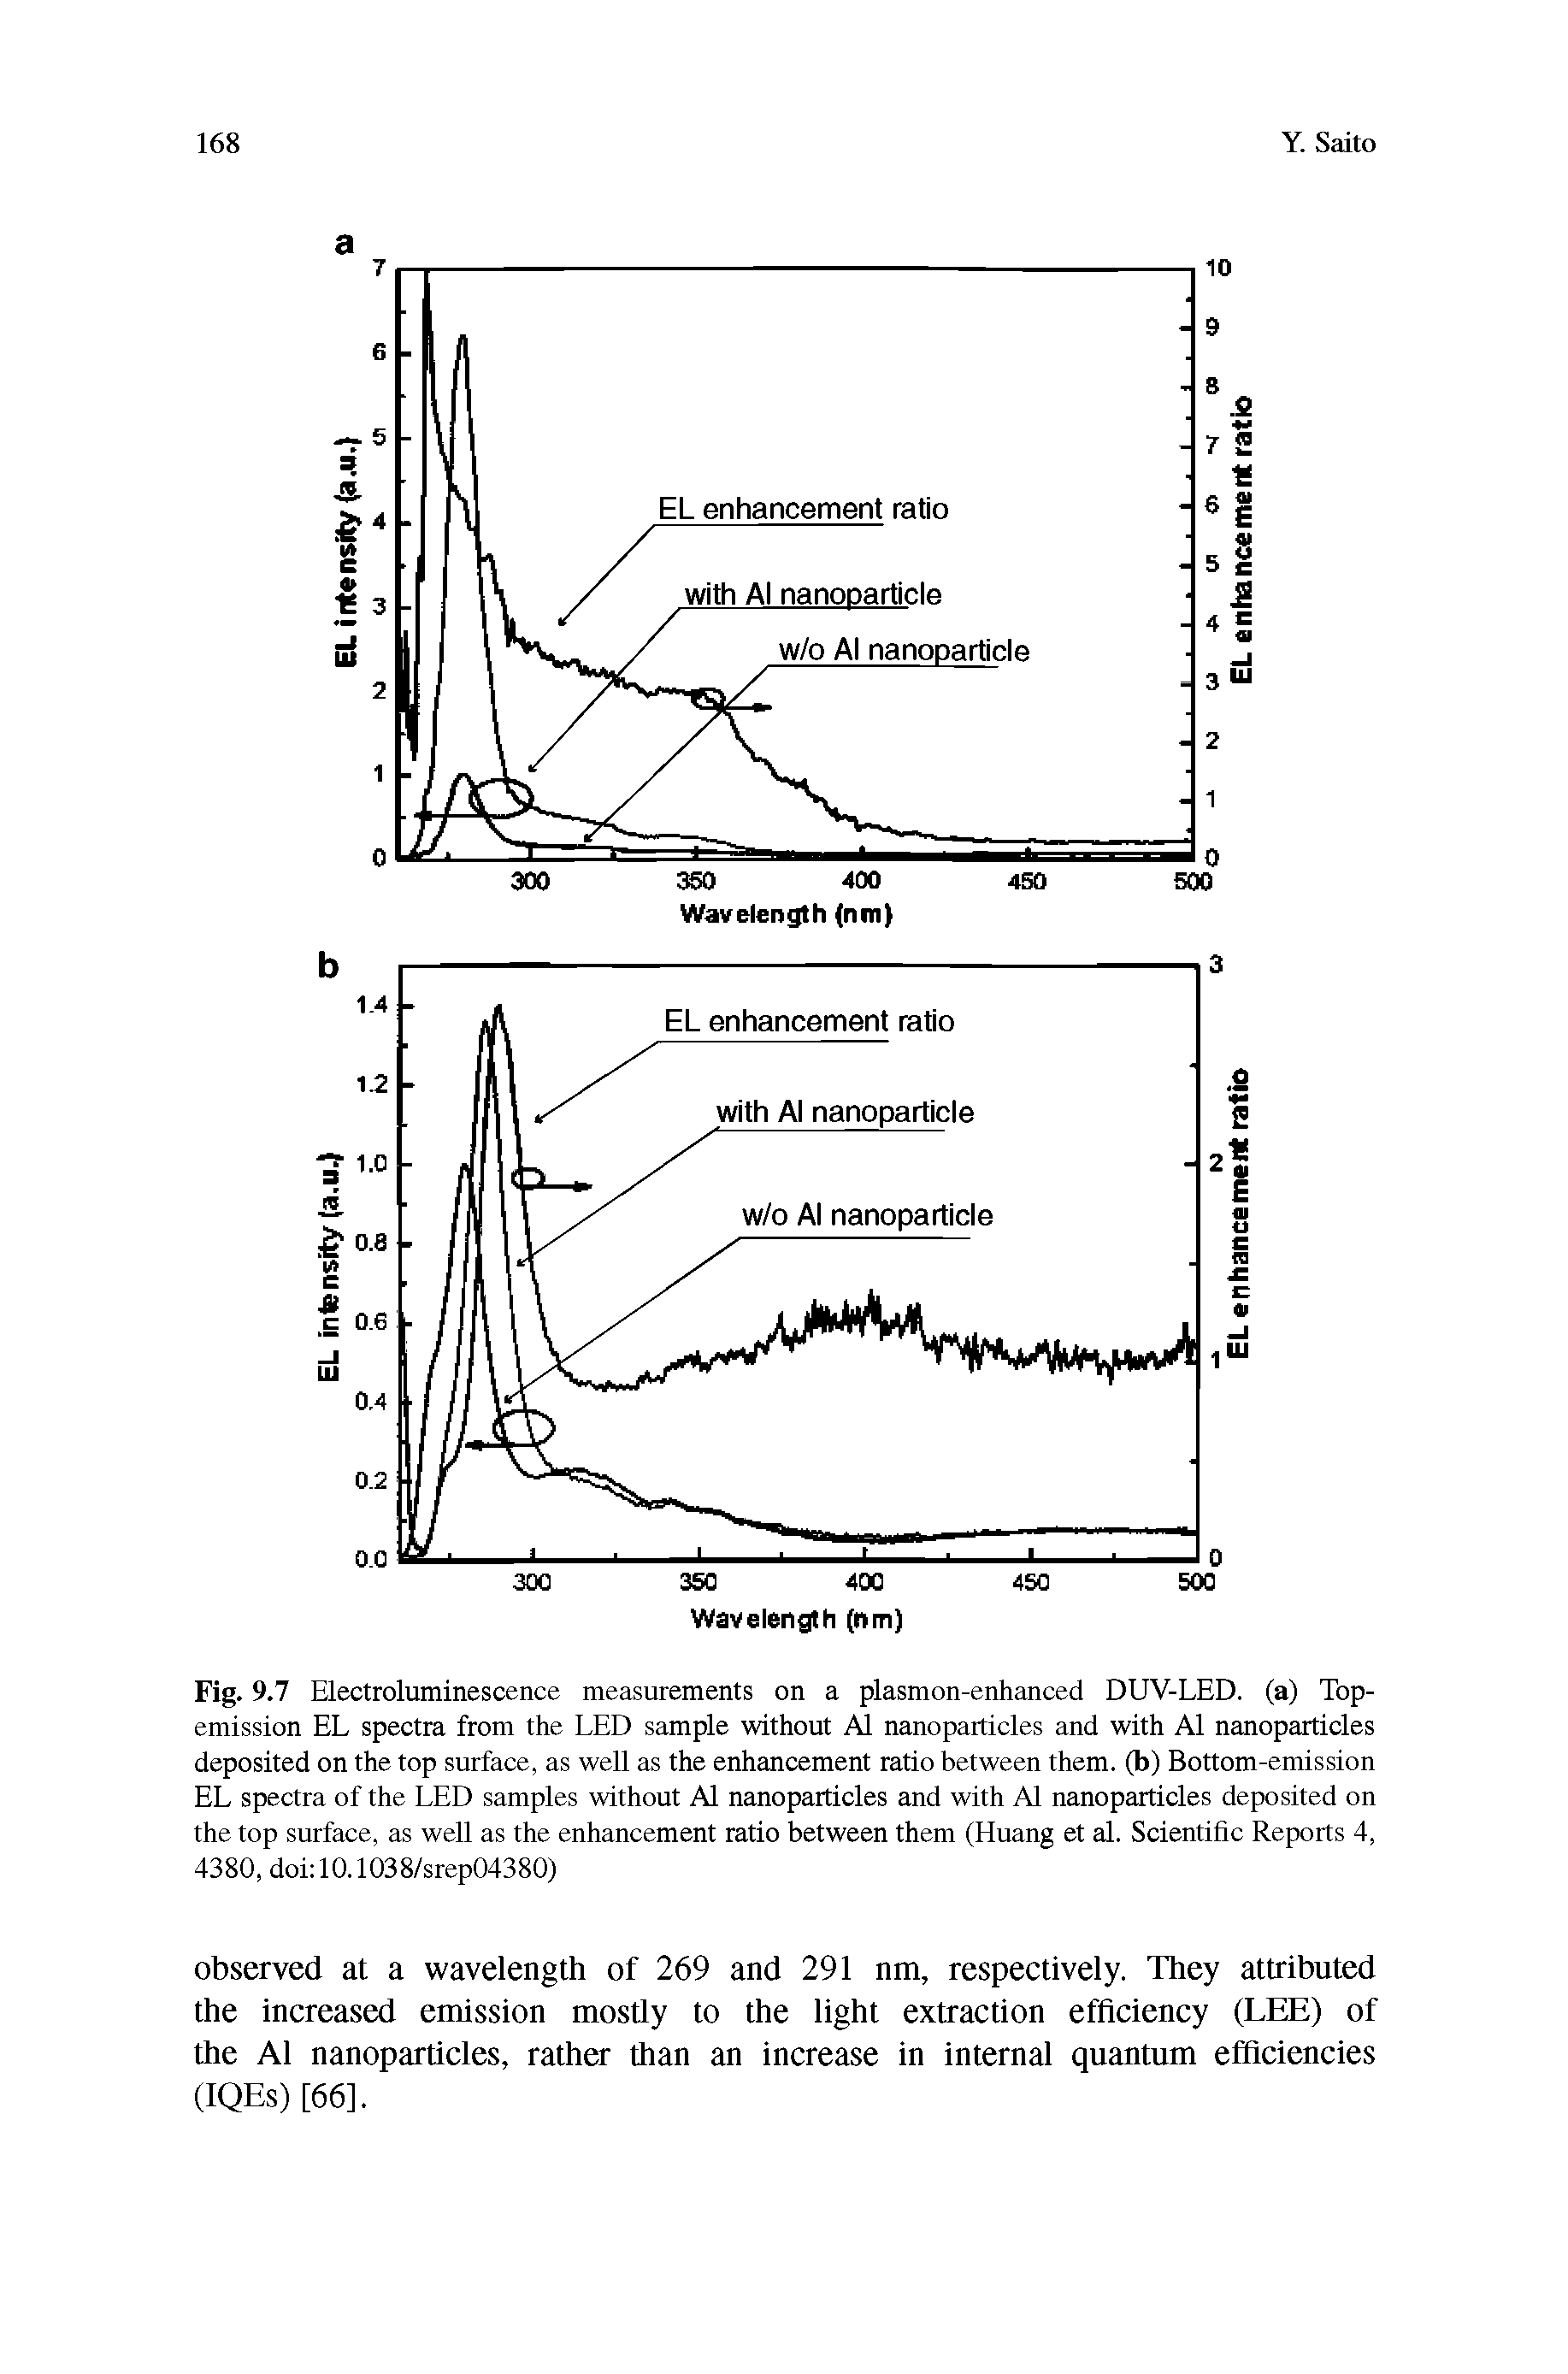 Fig. 9.7 Electroluminescence measurements on a plasmon-enhanced DUV-LED. (a) Top-emission EL spectra from the LED sample without A1 nanoparticles and with A1 nanoparticles deposited on the top surface, as well as the enhancement ratio between them, (b) Bottom-emission EL spectra of the LED samples without A1 nanopaiticles and with A1 nanoparticles deposited on the top surface, as weU as the enhancement ratio between them (Huang et al. Scientific Reports 4, 4380, doi 10.1038/srep04380)...